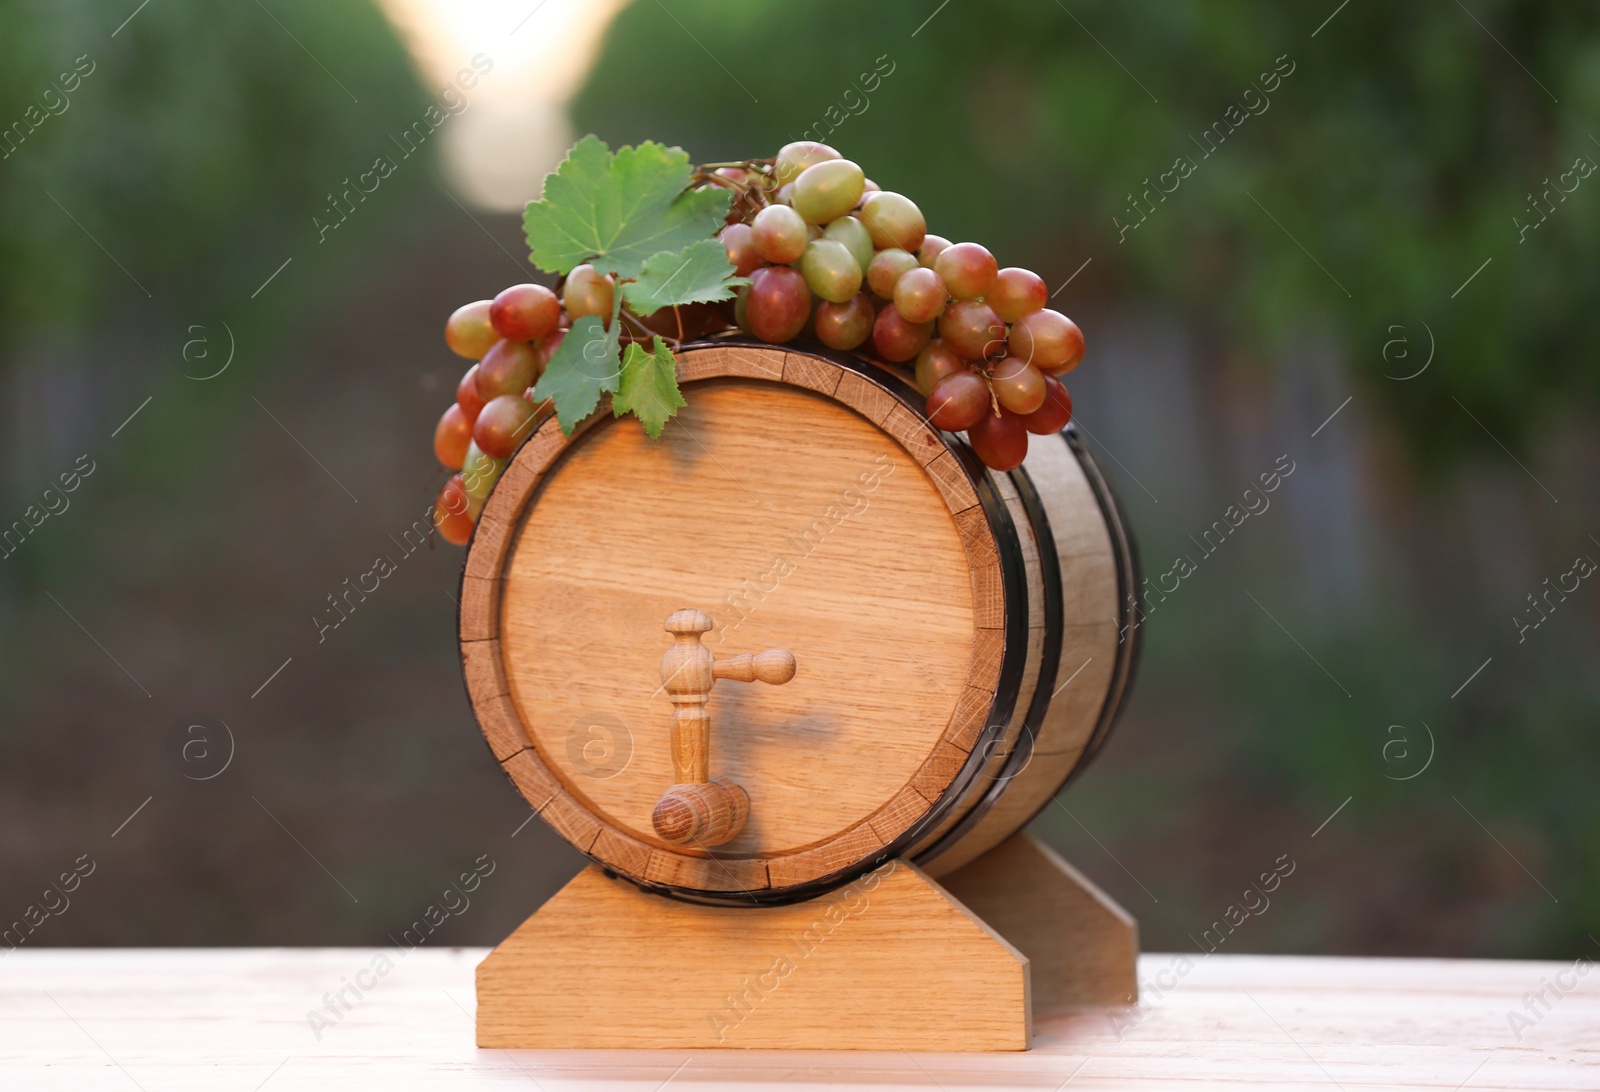 Photo of Wooden wine barrel with ripe grapes on table outdoors